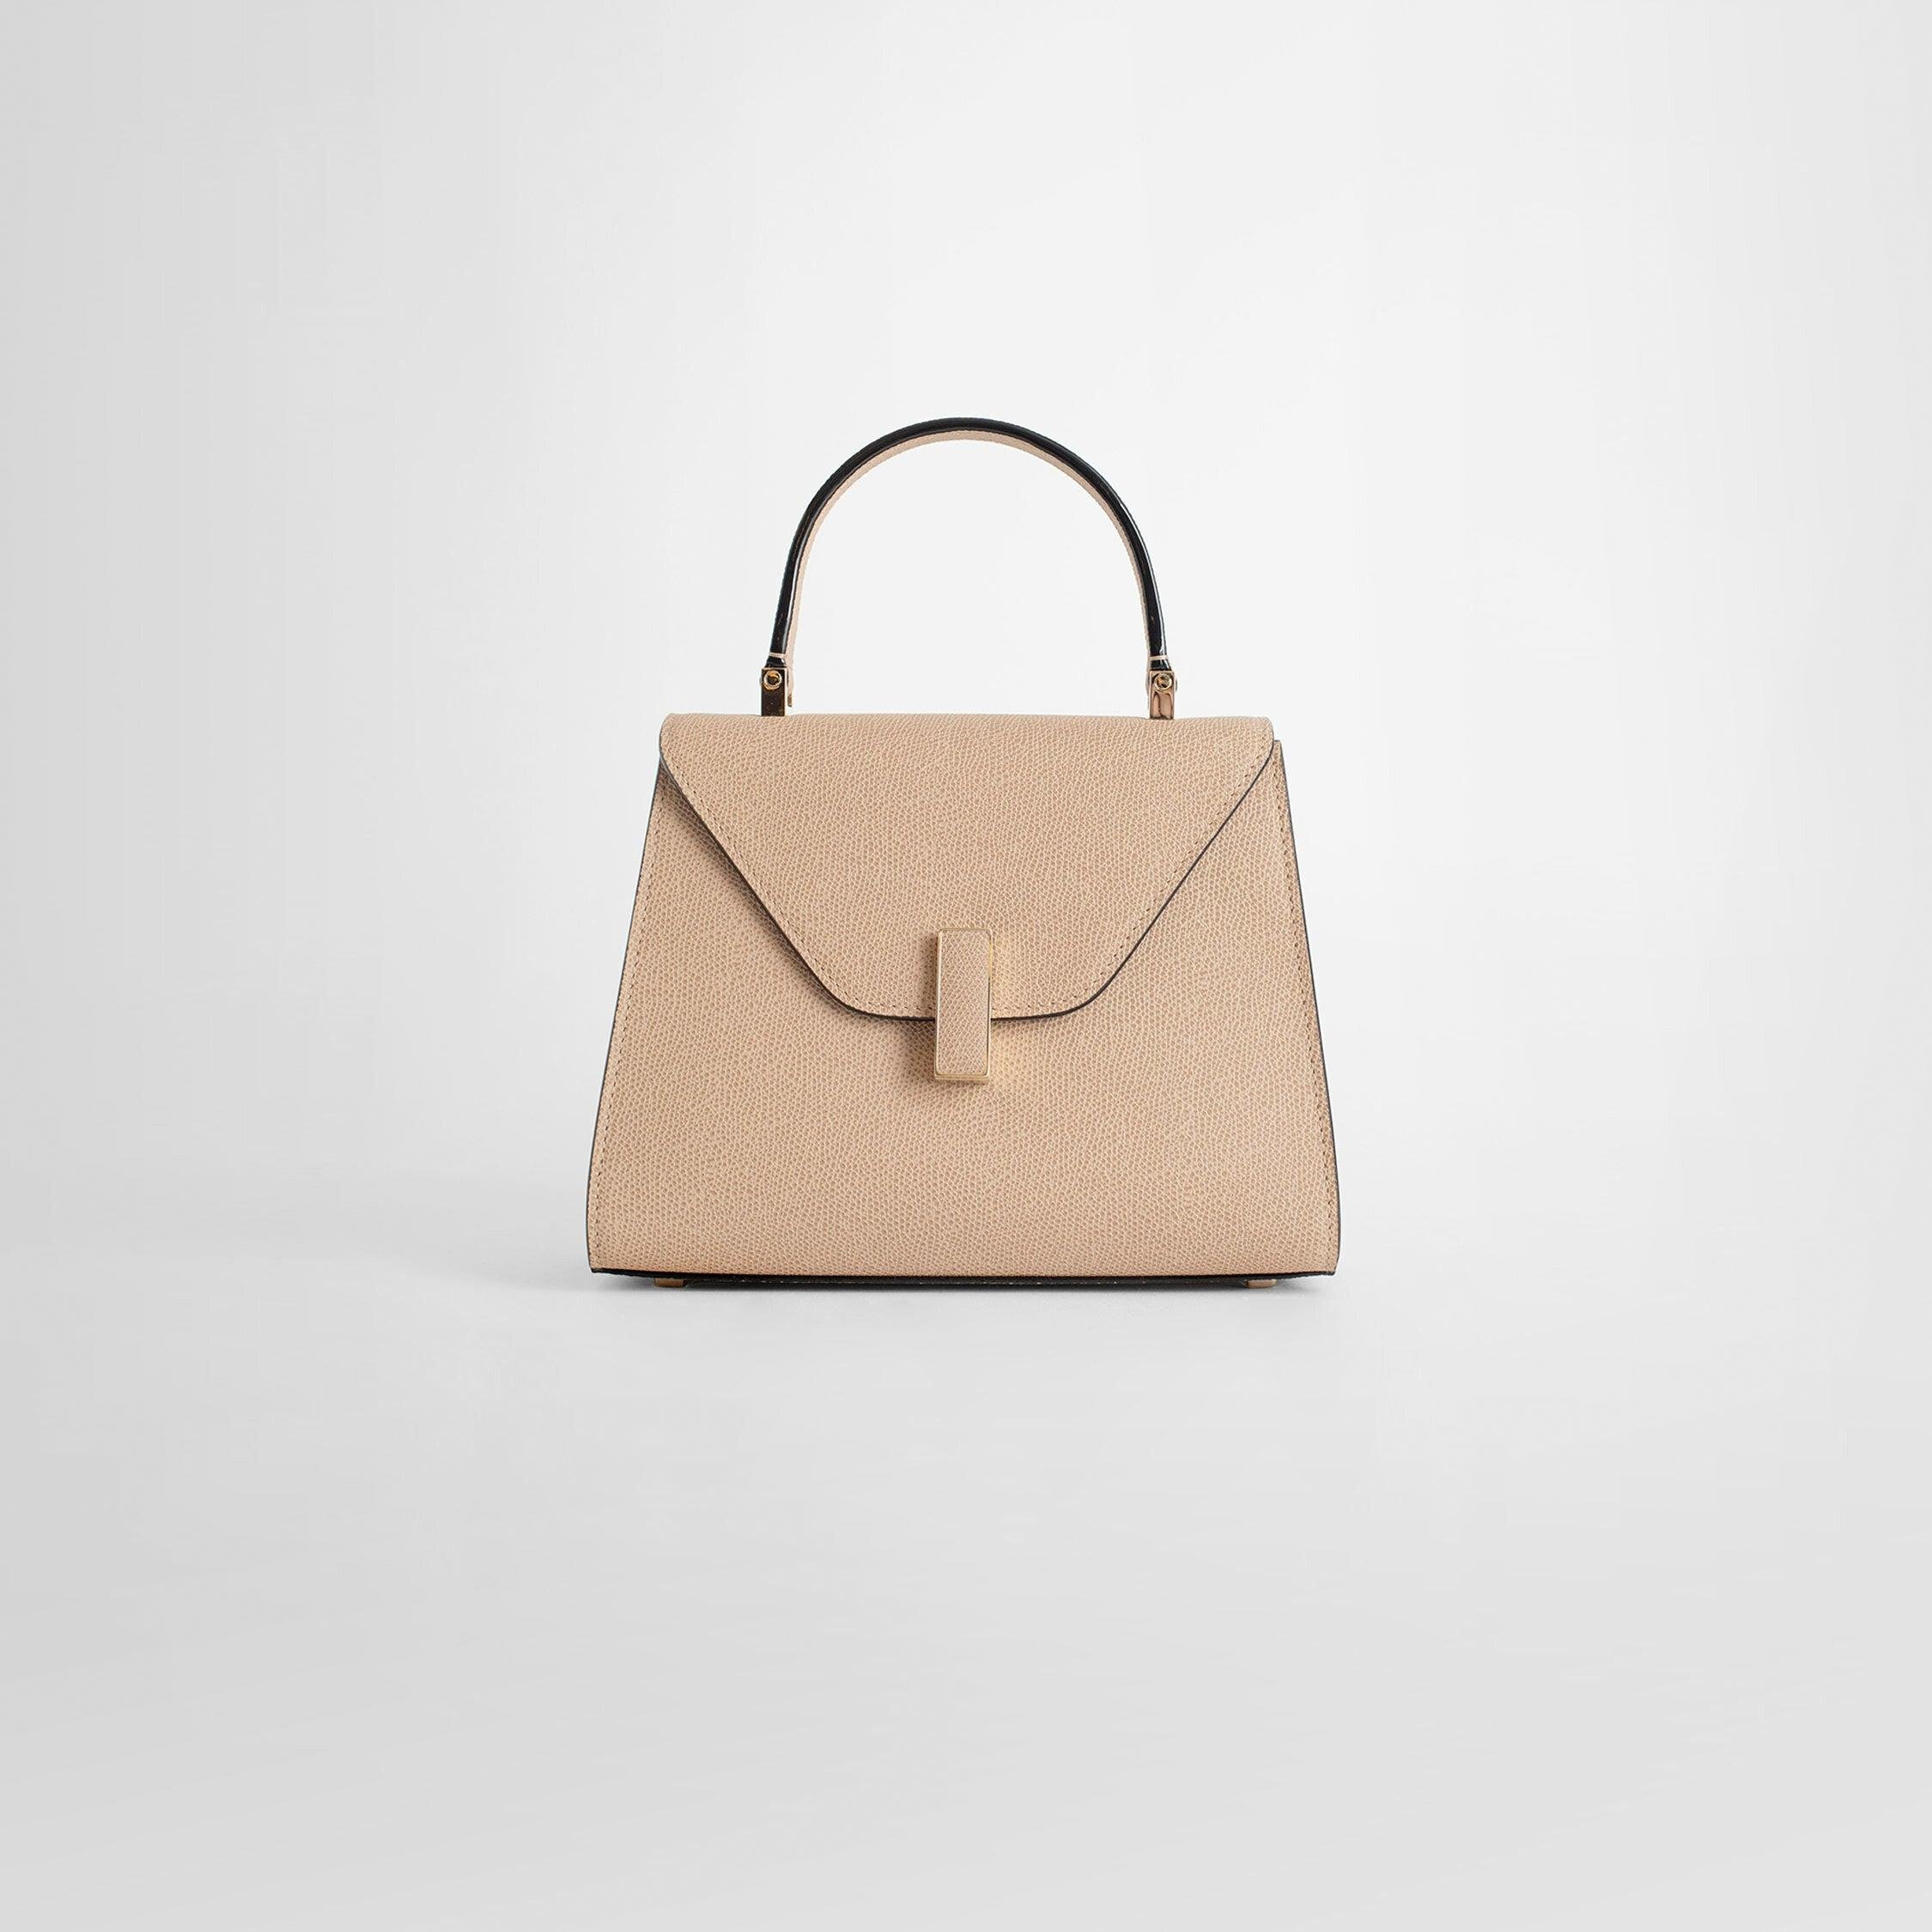 VALEXTRA WOMAN BEIGE TOP HANDLE BAGS by VALEXTRA